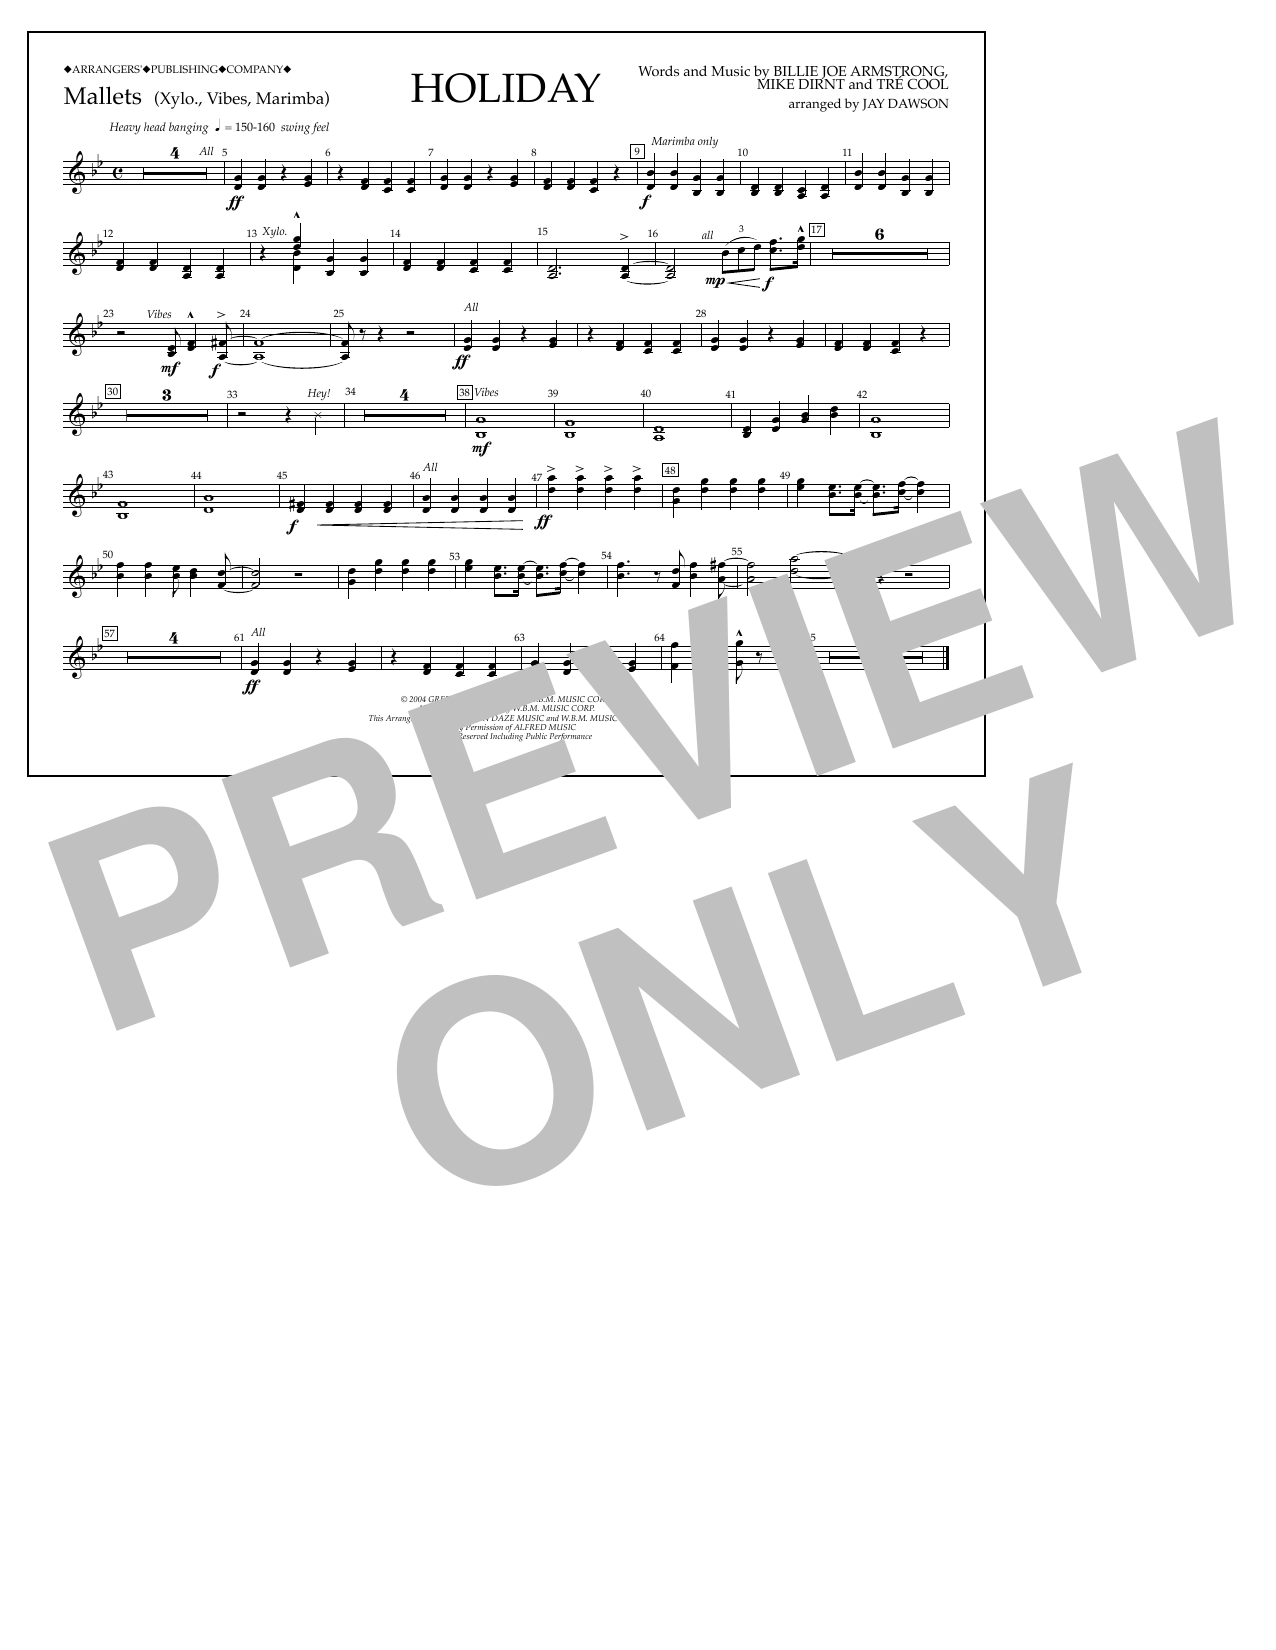 Download Jay Dawson Holiday - Mallet Percussion Sheet Music